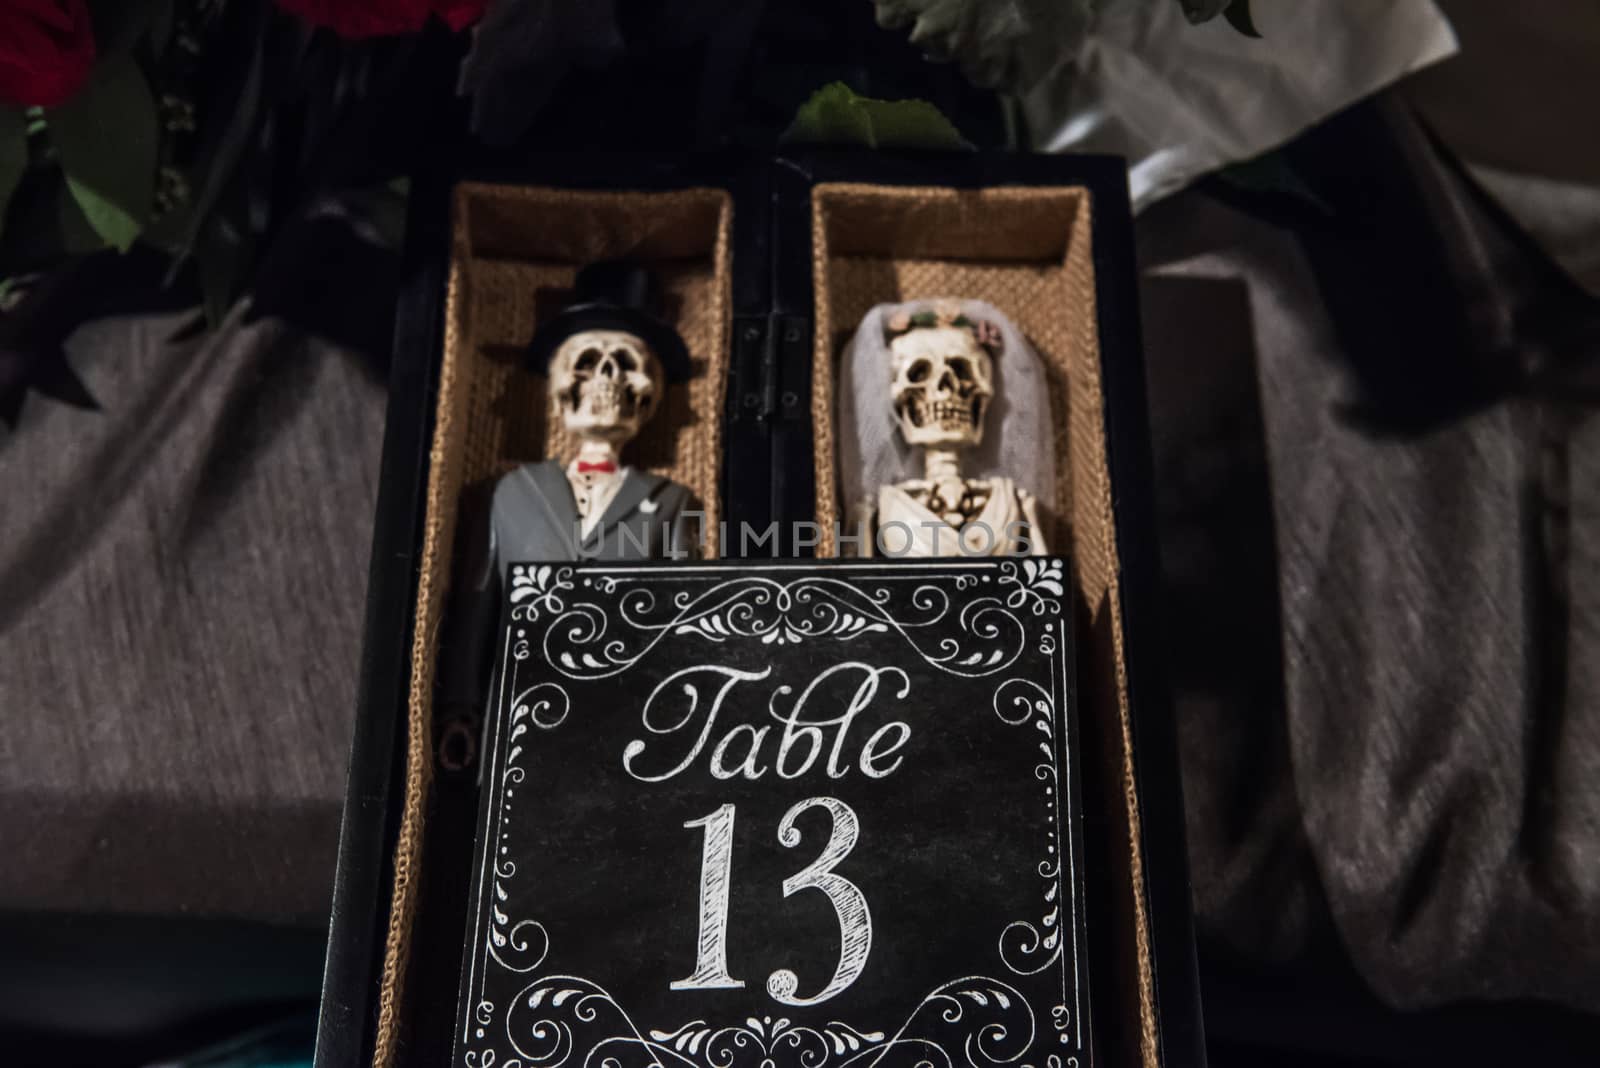 Image of table number 13 featuring day of the dead figures